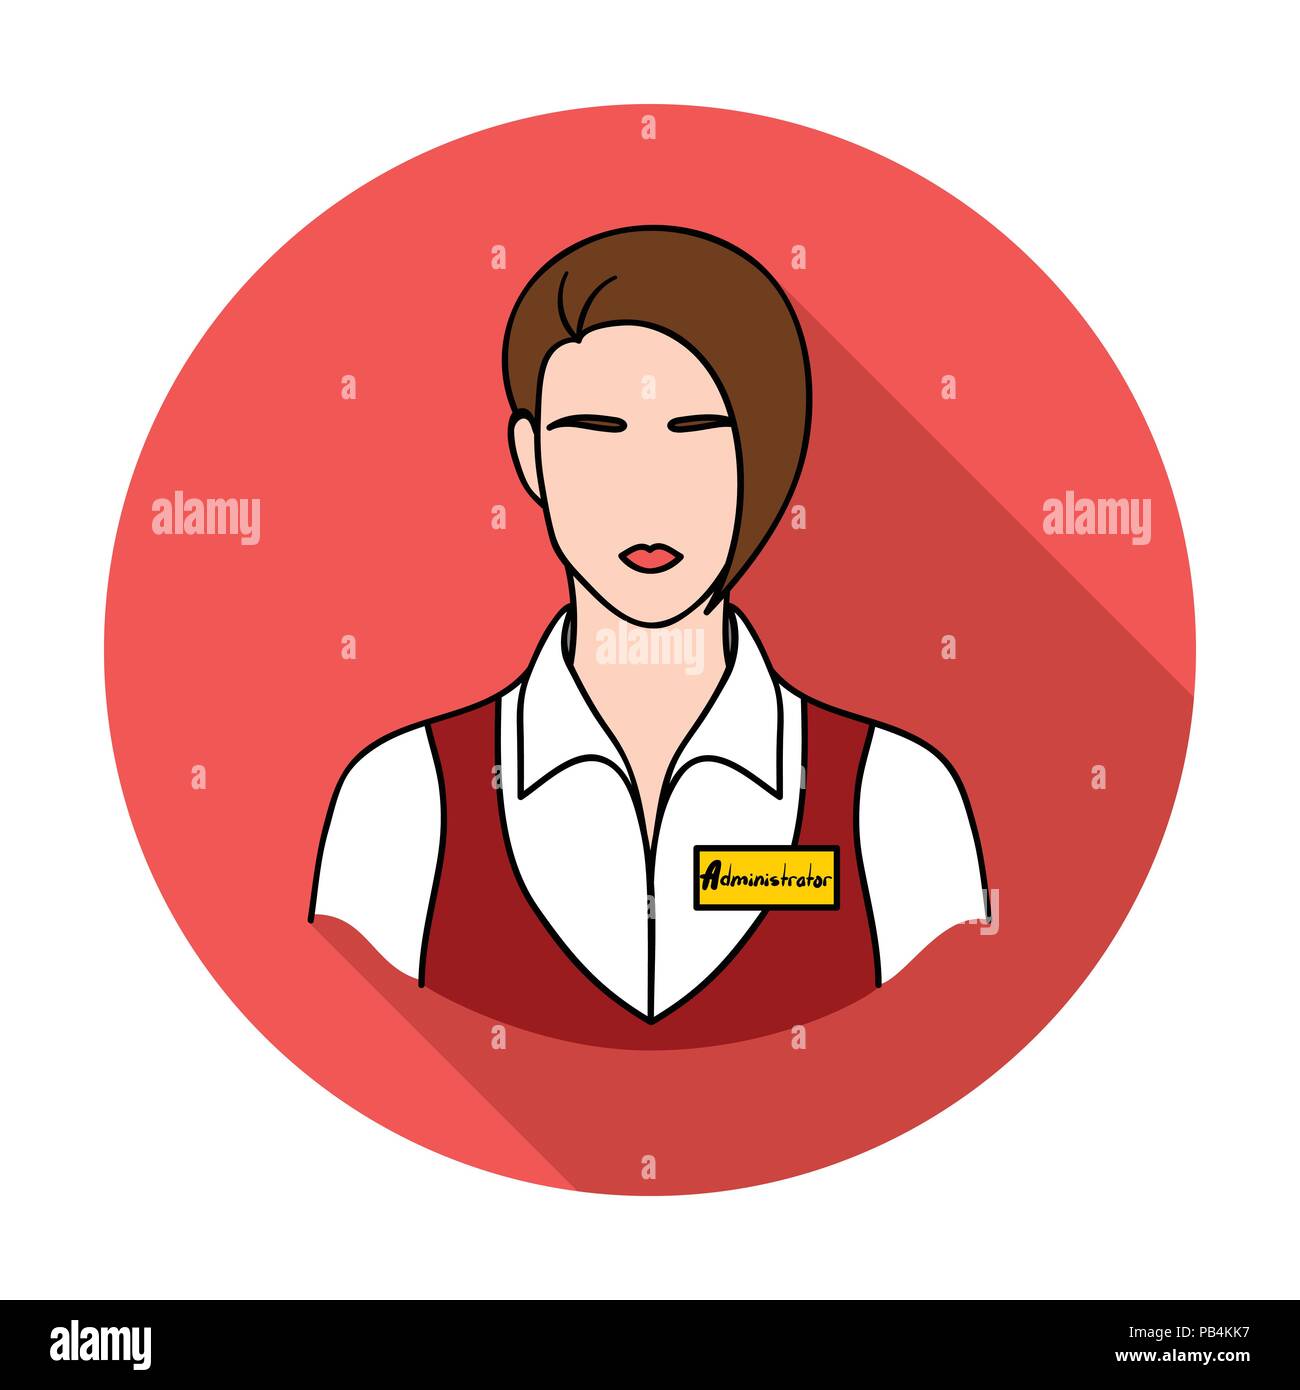 Restaurant waitress with a badge icon in flat style isolated on white background. Restaurant symbol vector illustration. Stock Vector